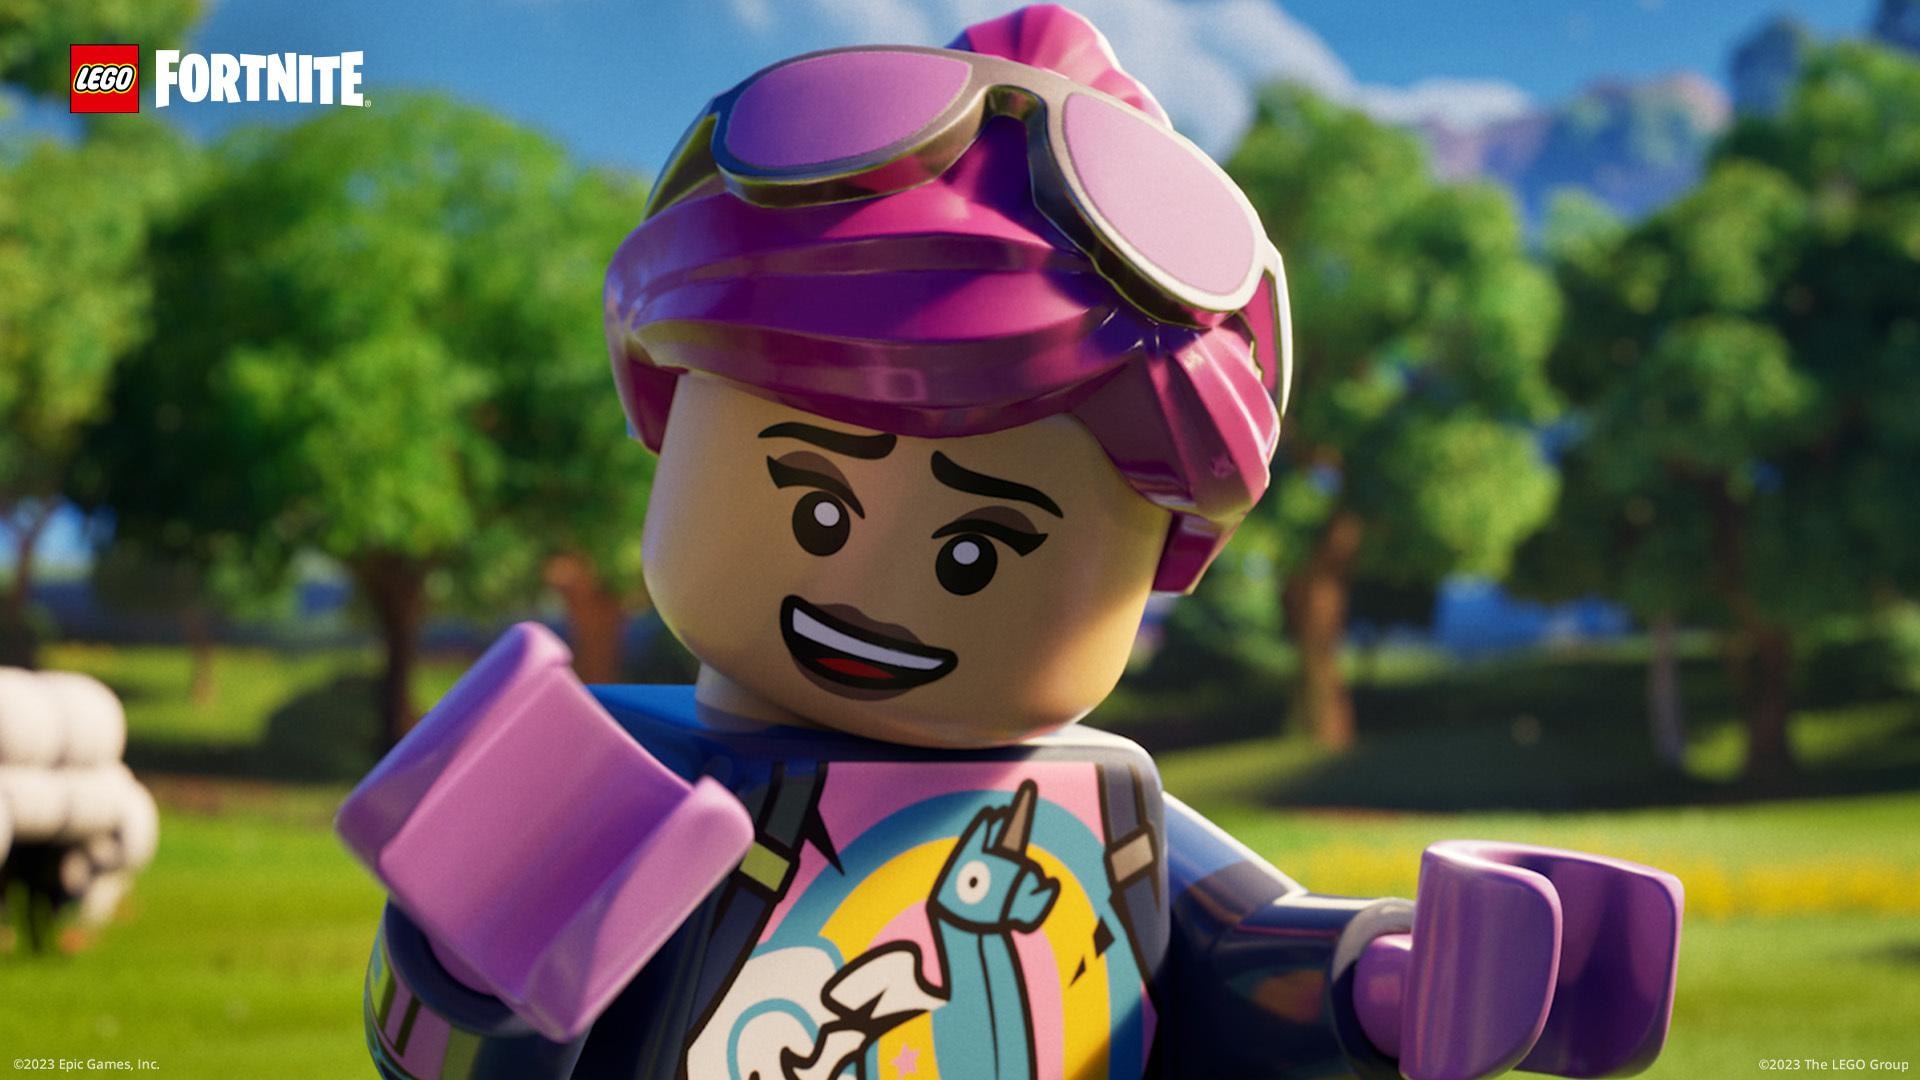 a-parents-guide-to-lego-fortnite-how-to-play-and-set-up-parental-controls